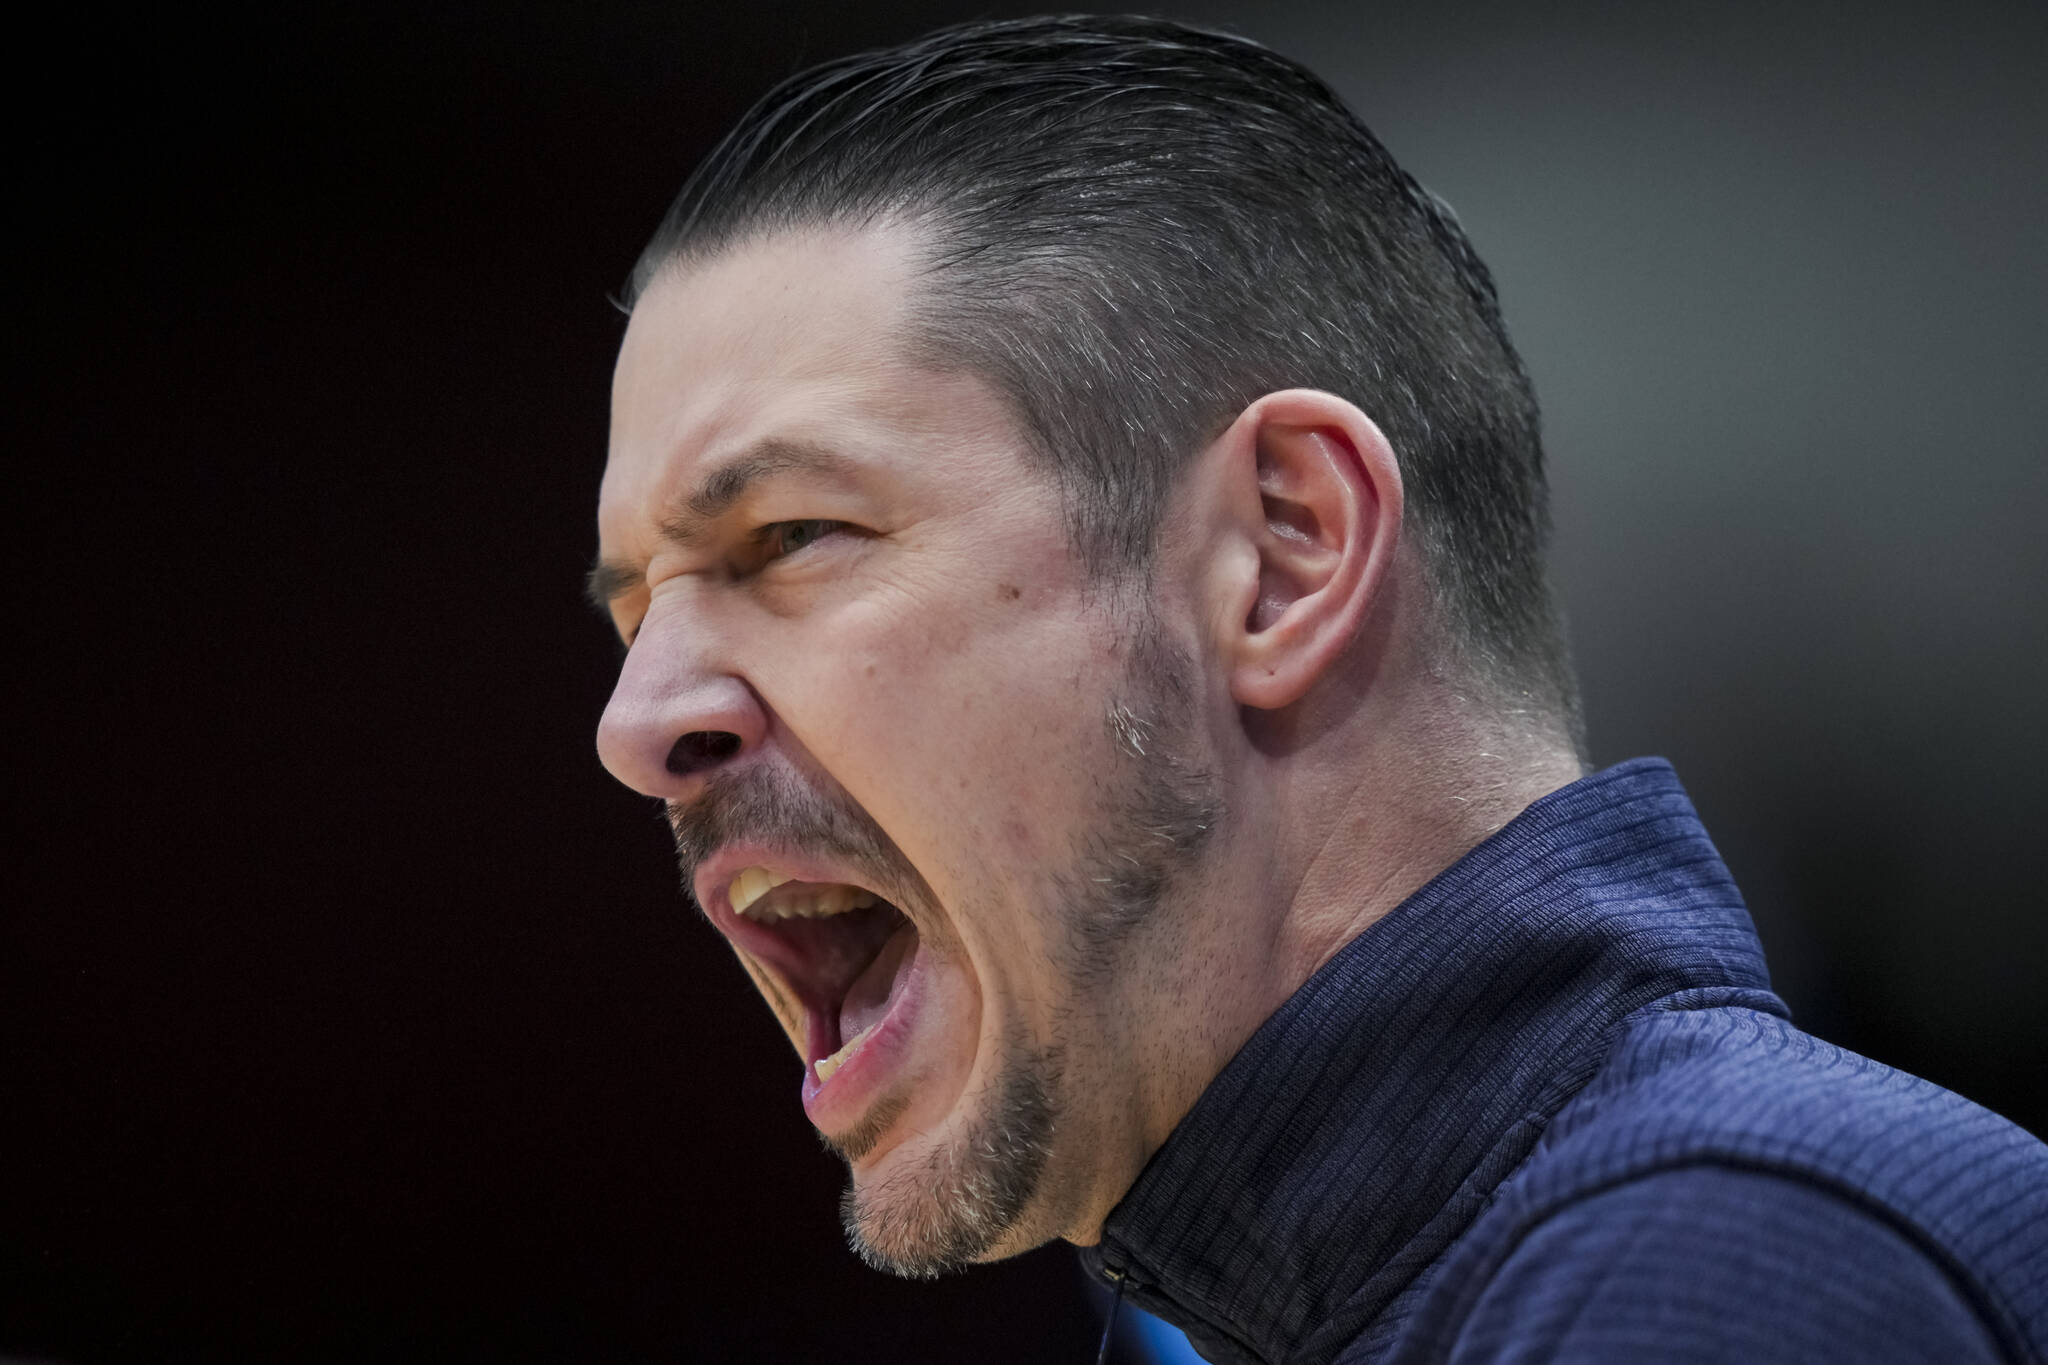 Montana State coach Matt Logie shouts during the first half of the team’s First Four game against Grambling State in the NCAA men’s college basketball tournament March 20 in Dayton, Ohio. (AP Photo/Aaron Doster)